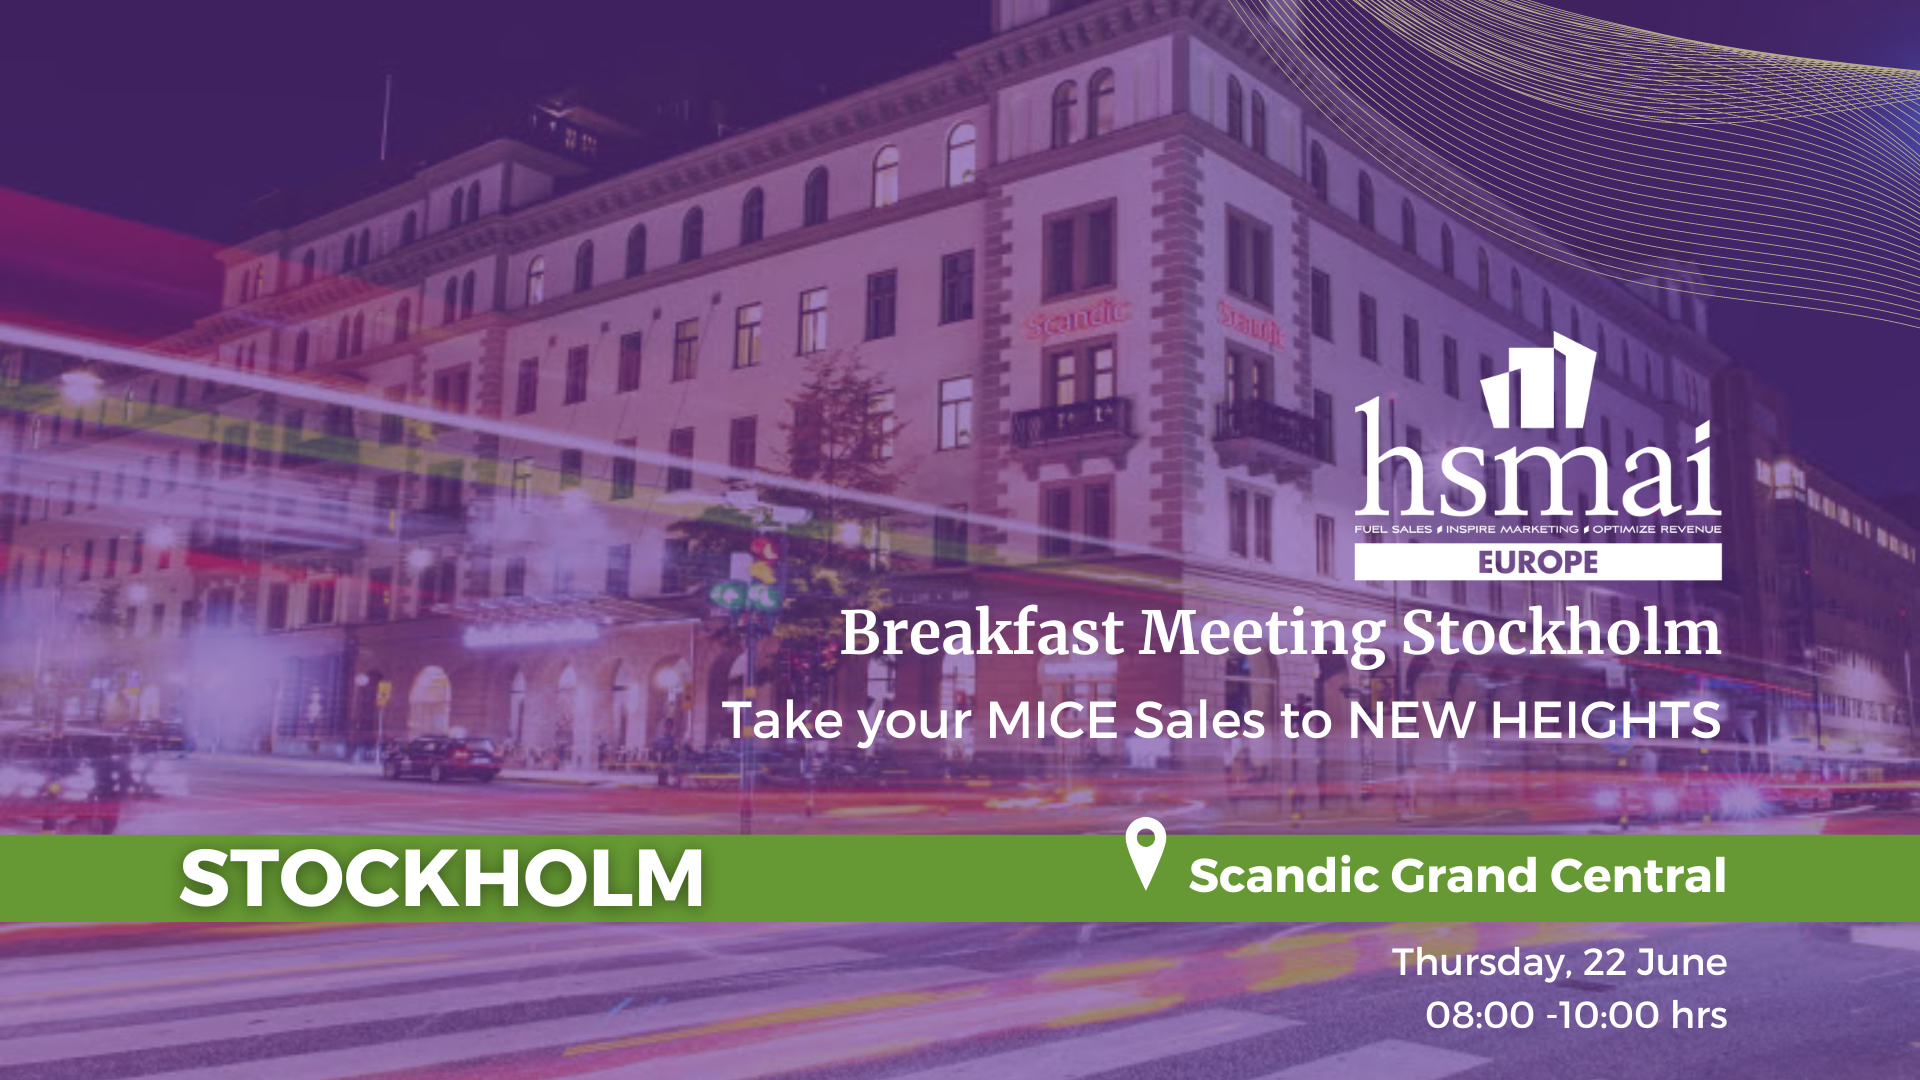 breakfastmeeting-stockholm-at-scandic-grand-central